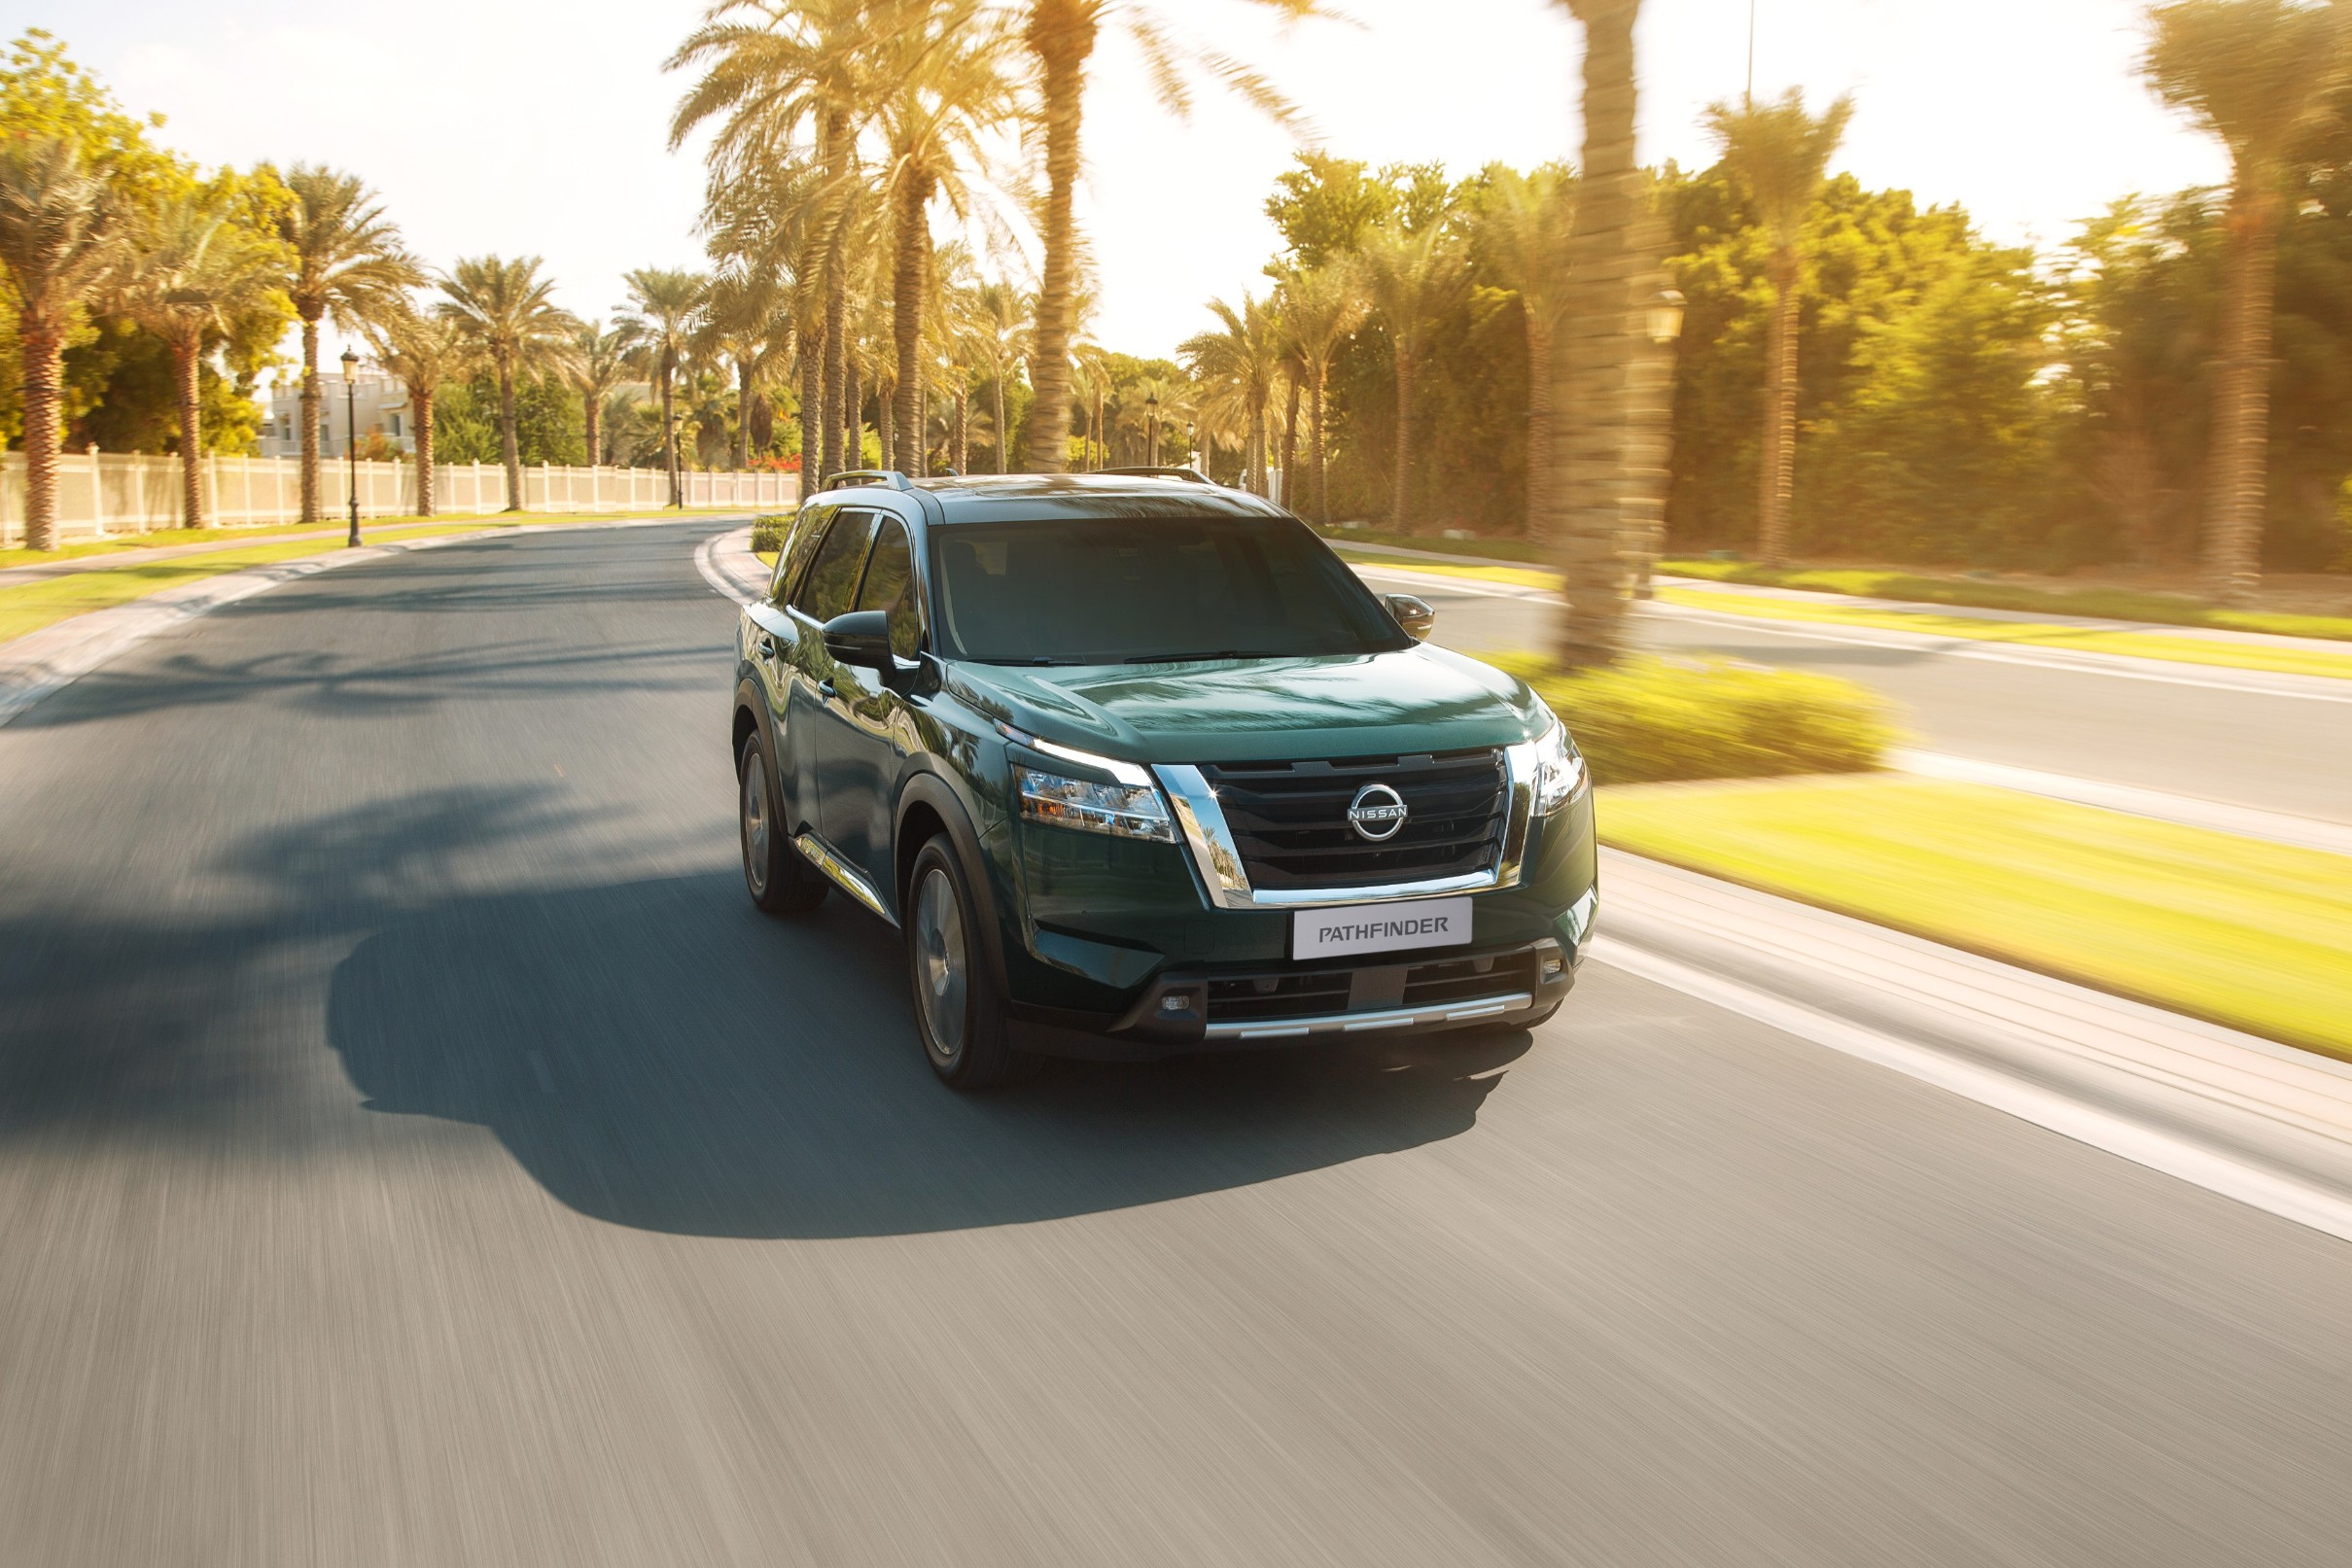 Nissan cements SUV leadership with the Middle East launch of the all-new Nissan Pathfinder 2022